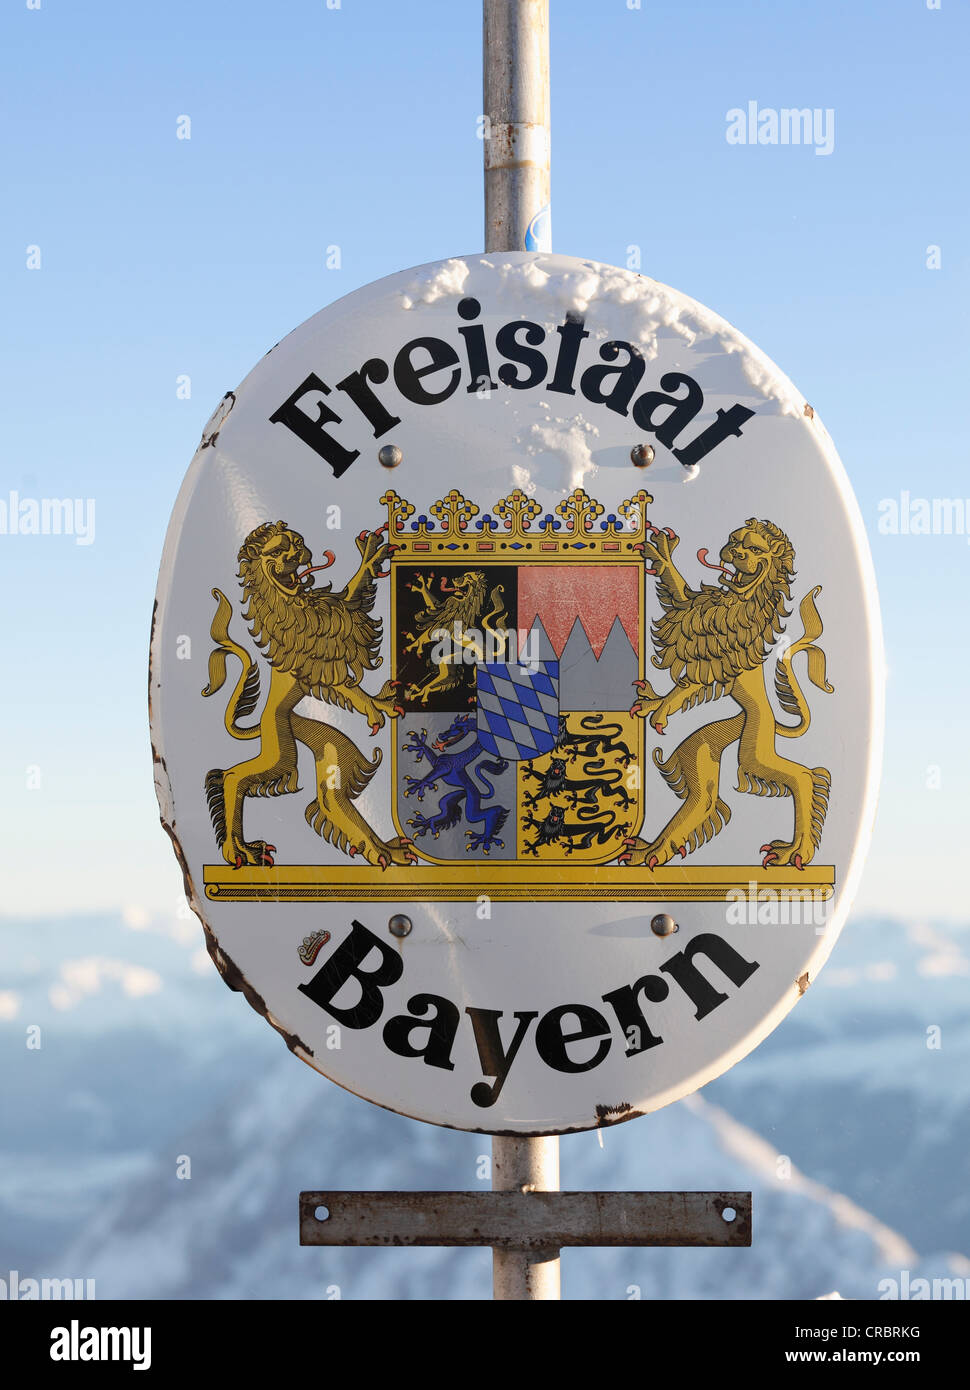 Sign, Freistaat Bayern, Free State of Bavaria, at the summit of Zugspitze Mountain, Bavaria, Germany, Europe Stock Photo